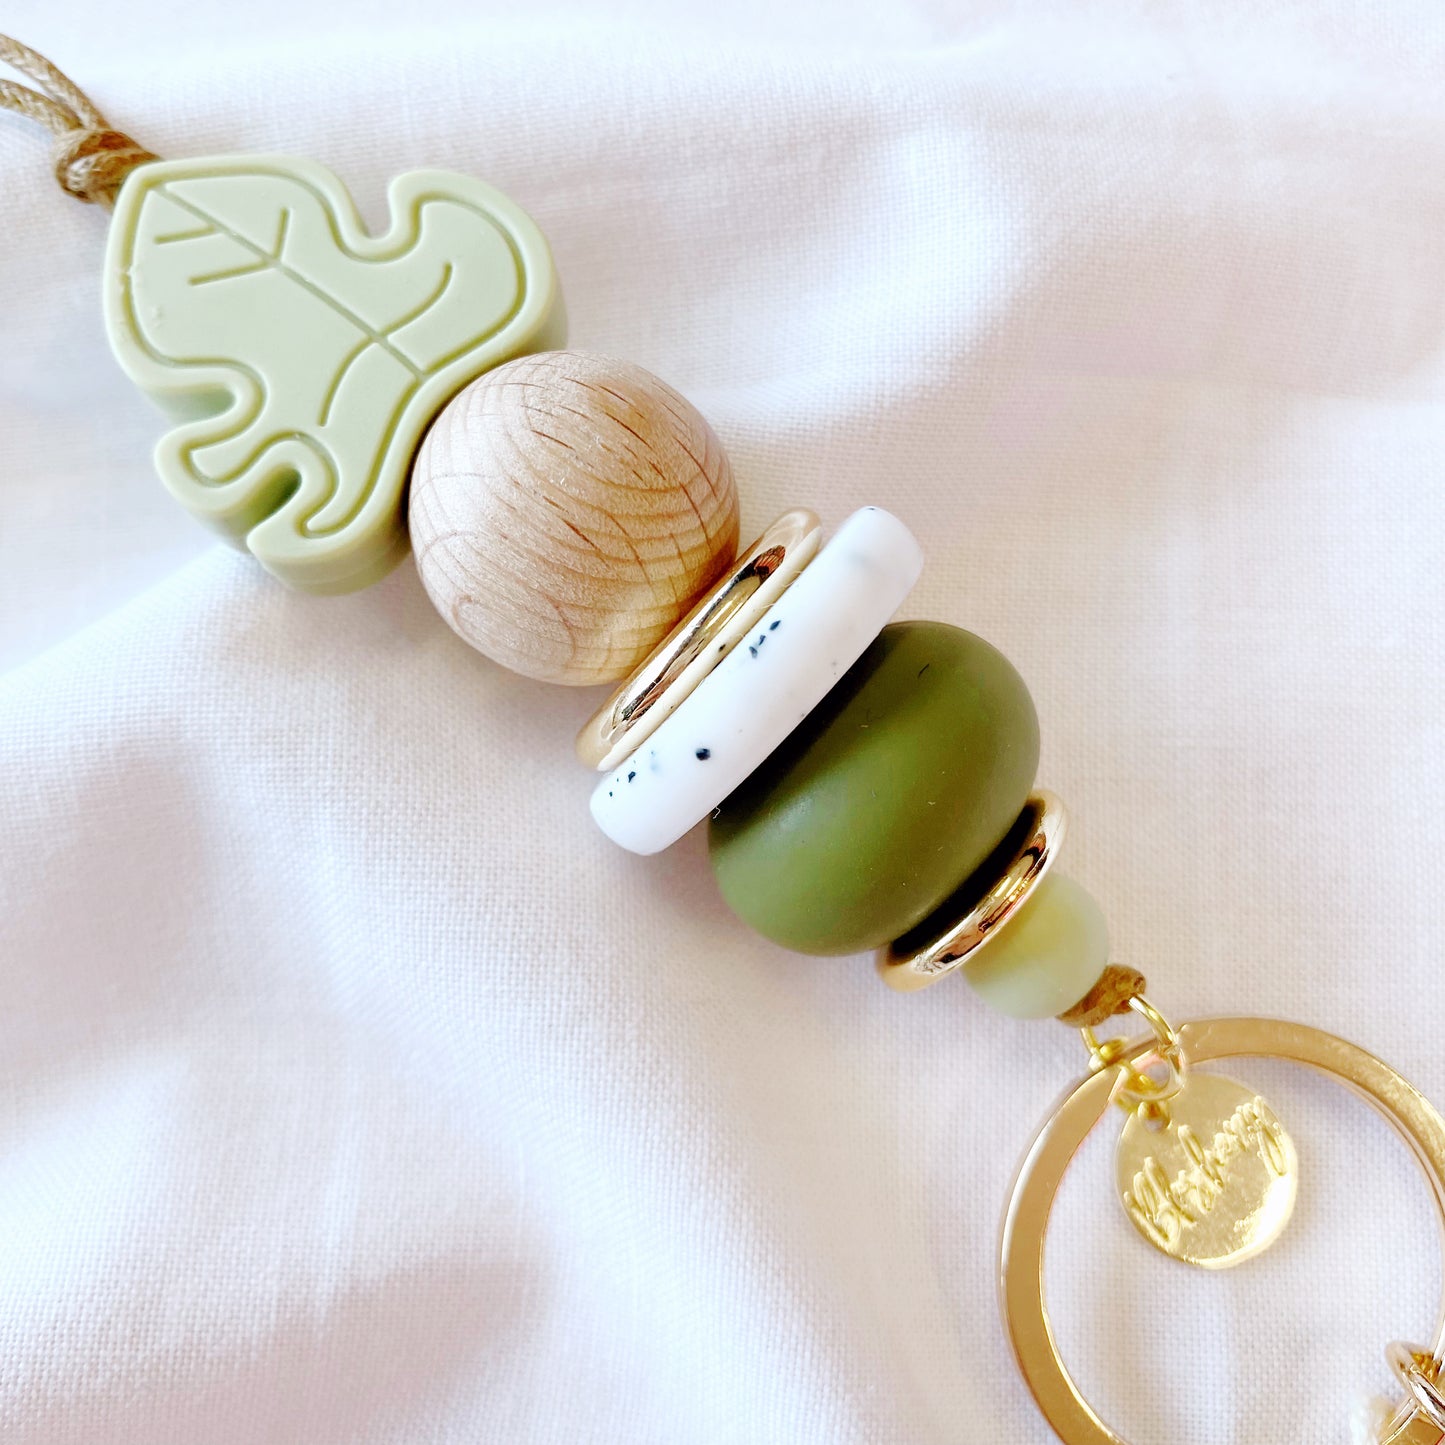 green leaf silicone beads, wood, white and gold make up this teacher lanyard